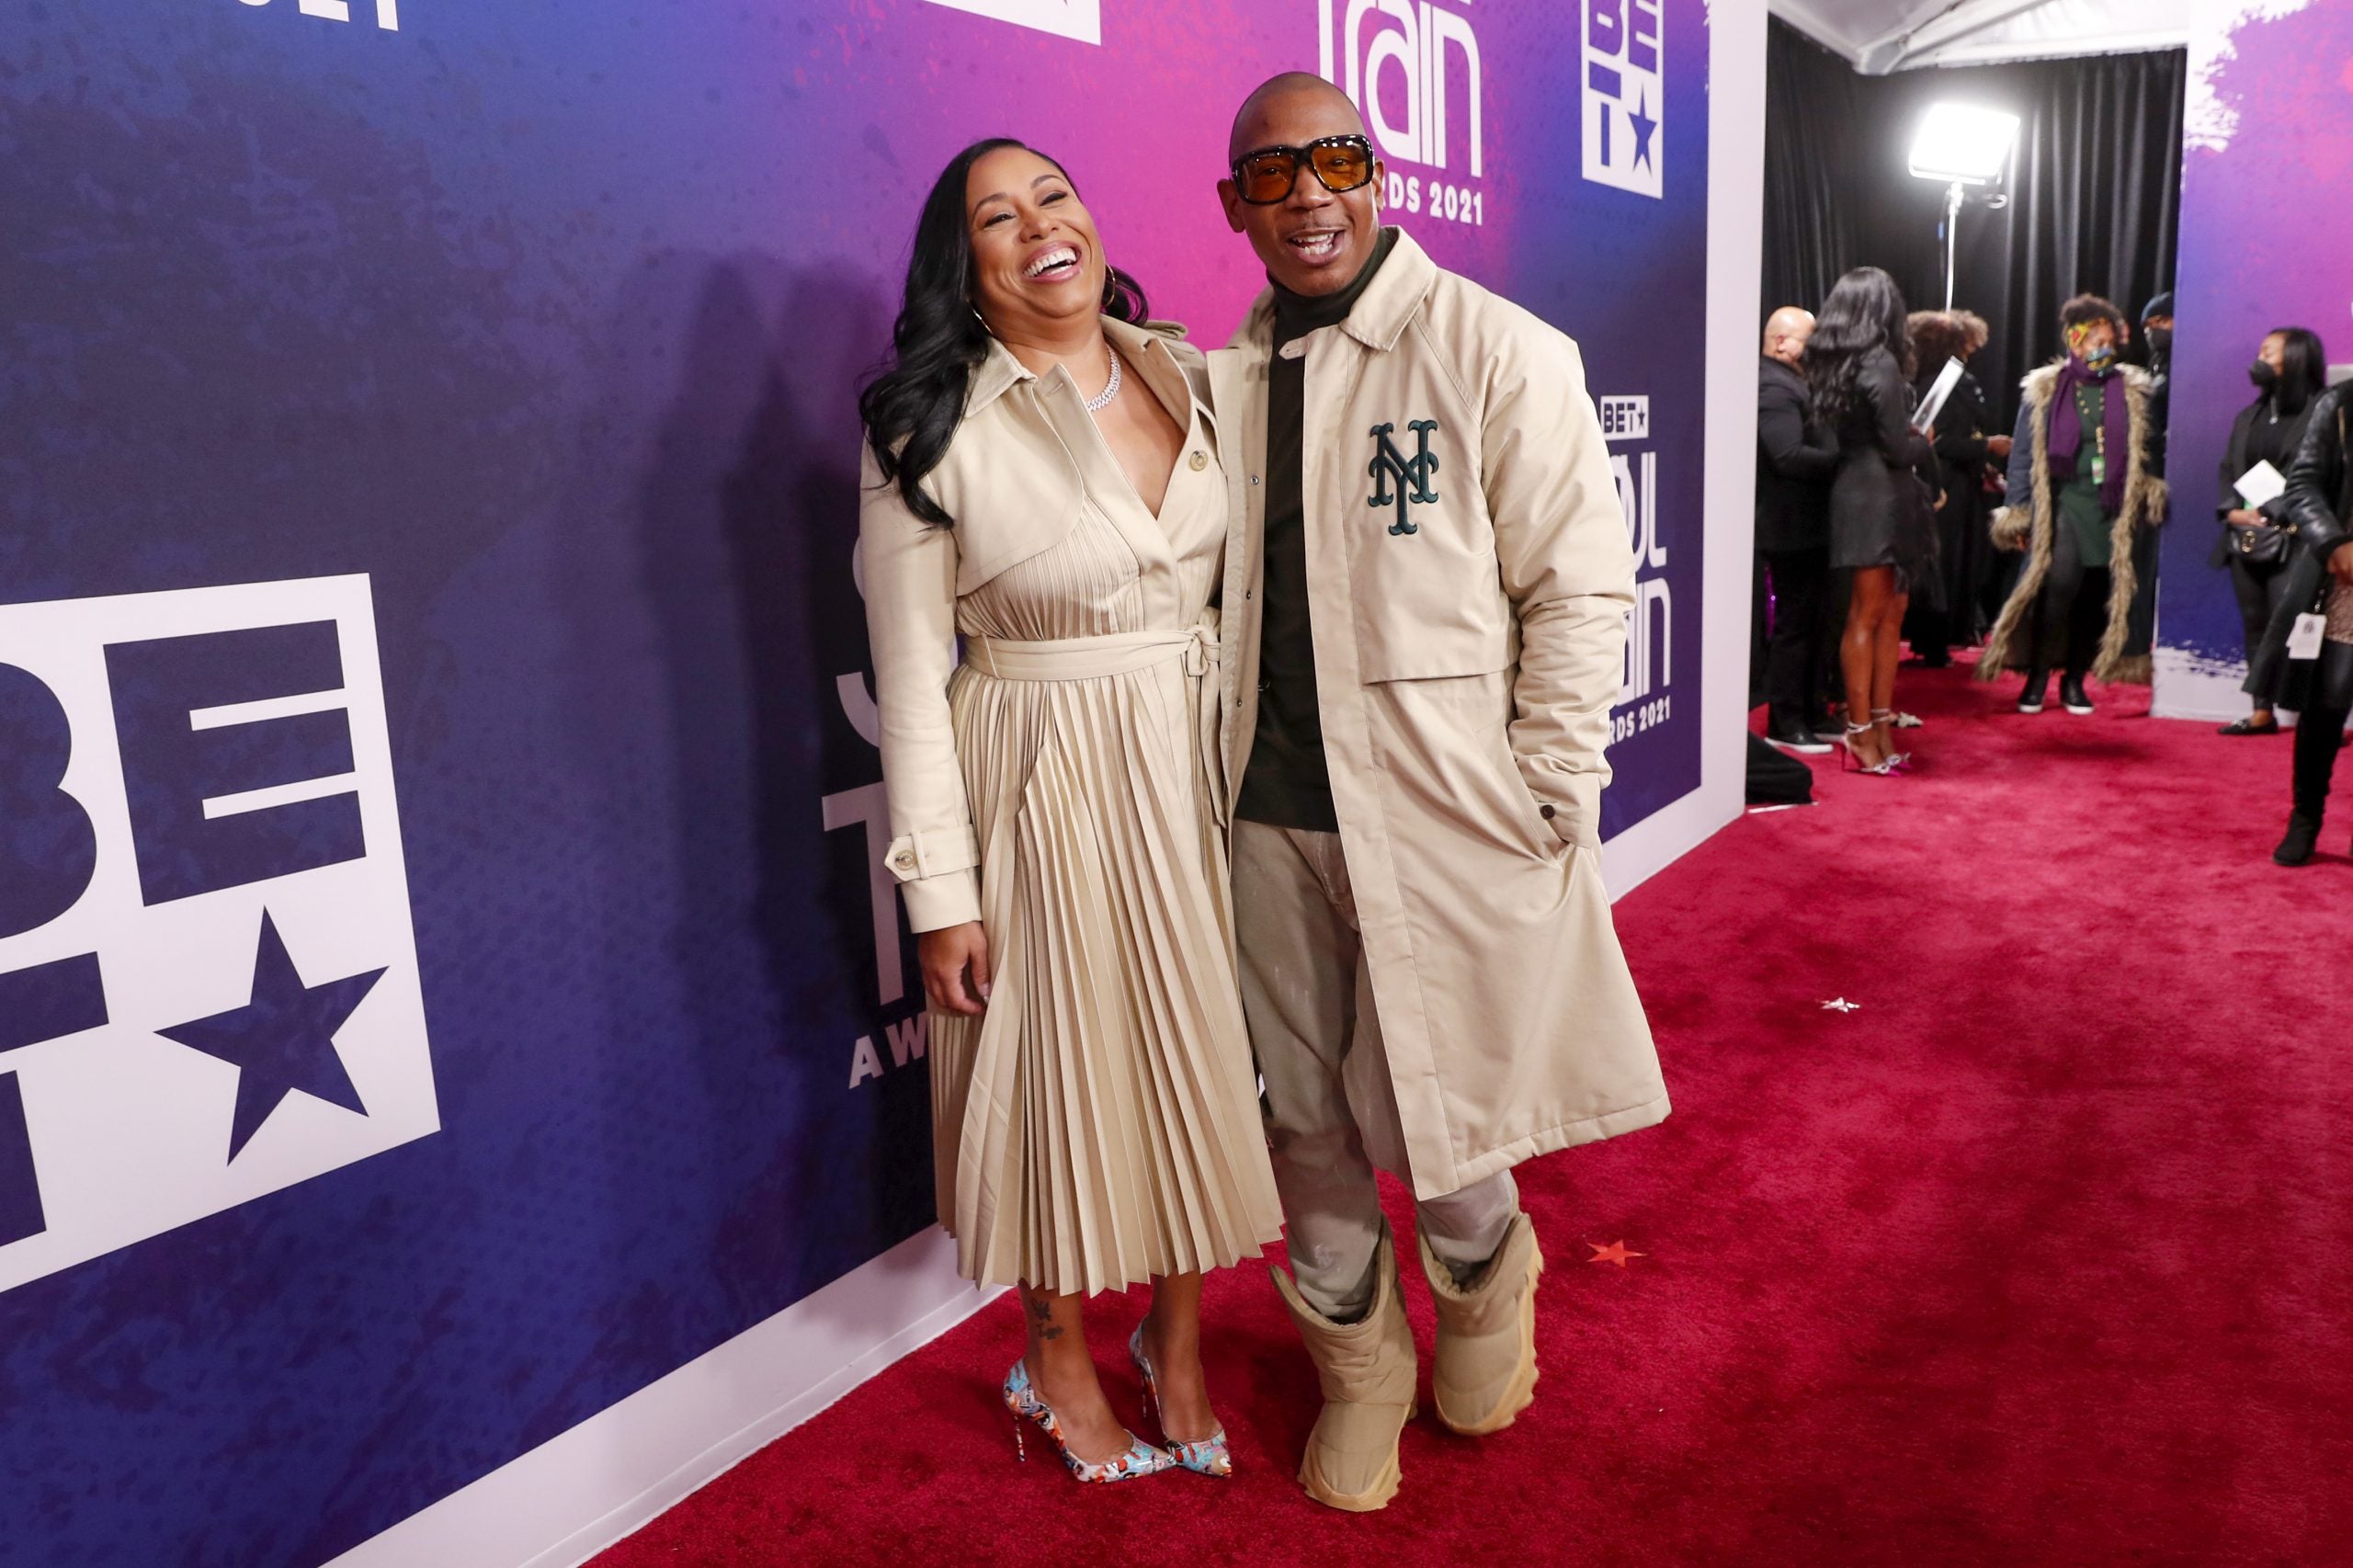 Ja Rule And Wife Aisha Just Celebrated 23 Years Of Marriage: 'Love You With All My Heart'